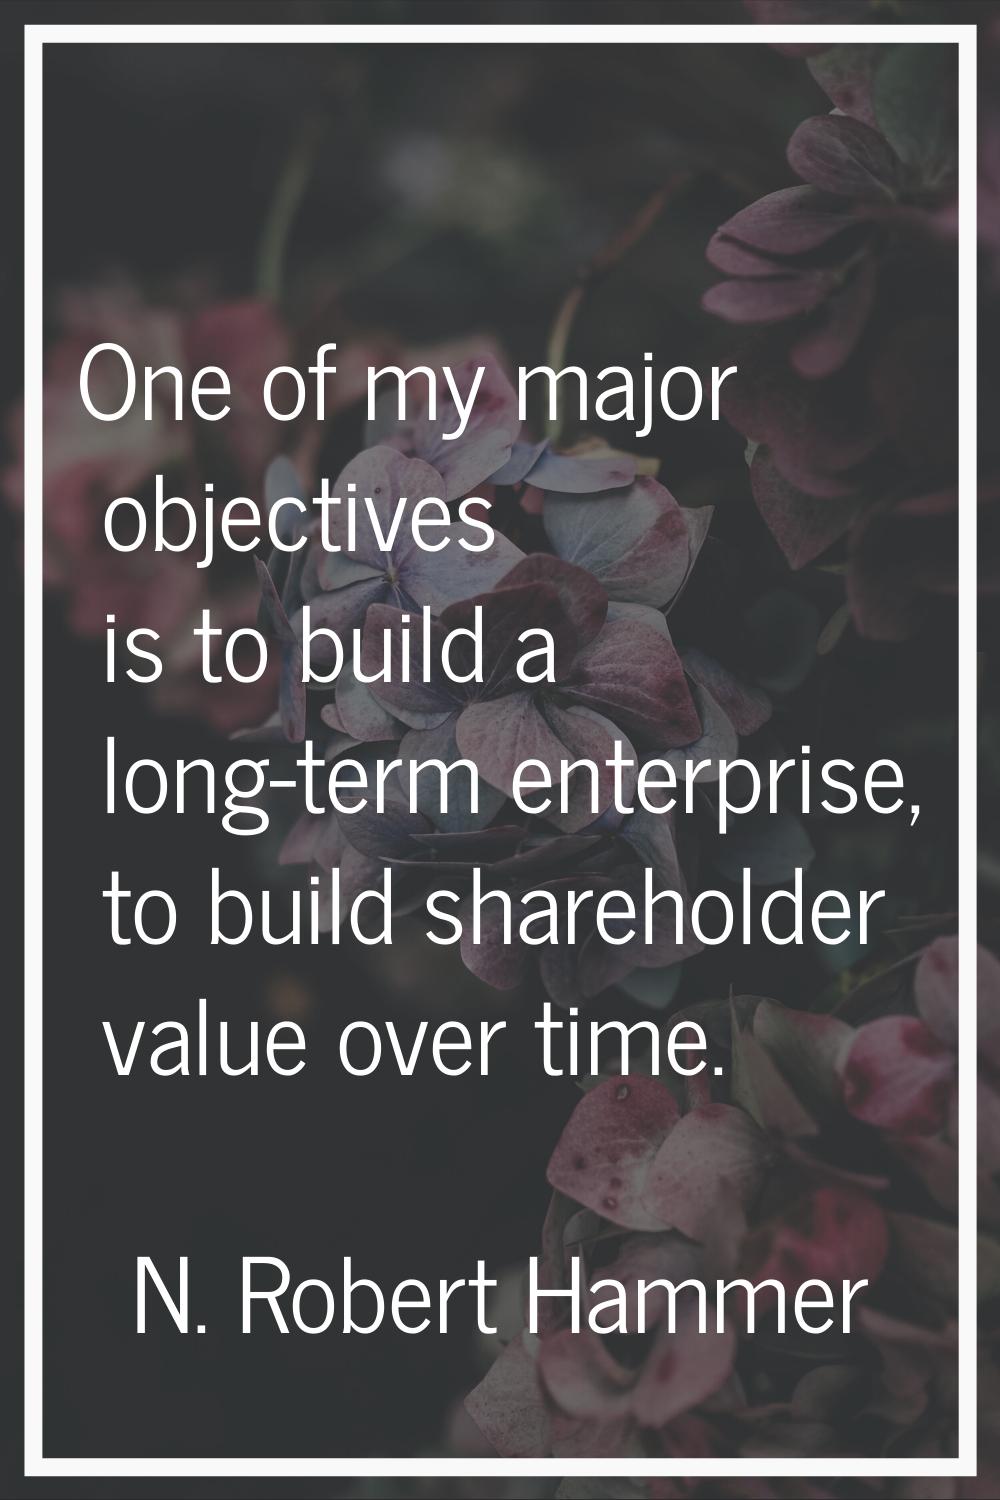 One of my major objectives is to build a long-term enterprise, to build shareholder value over time